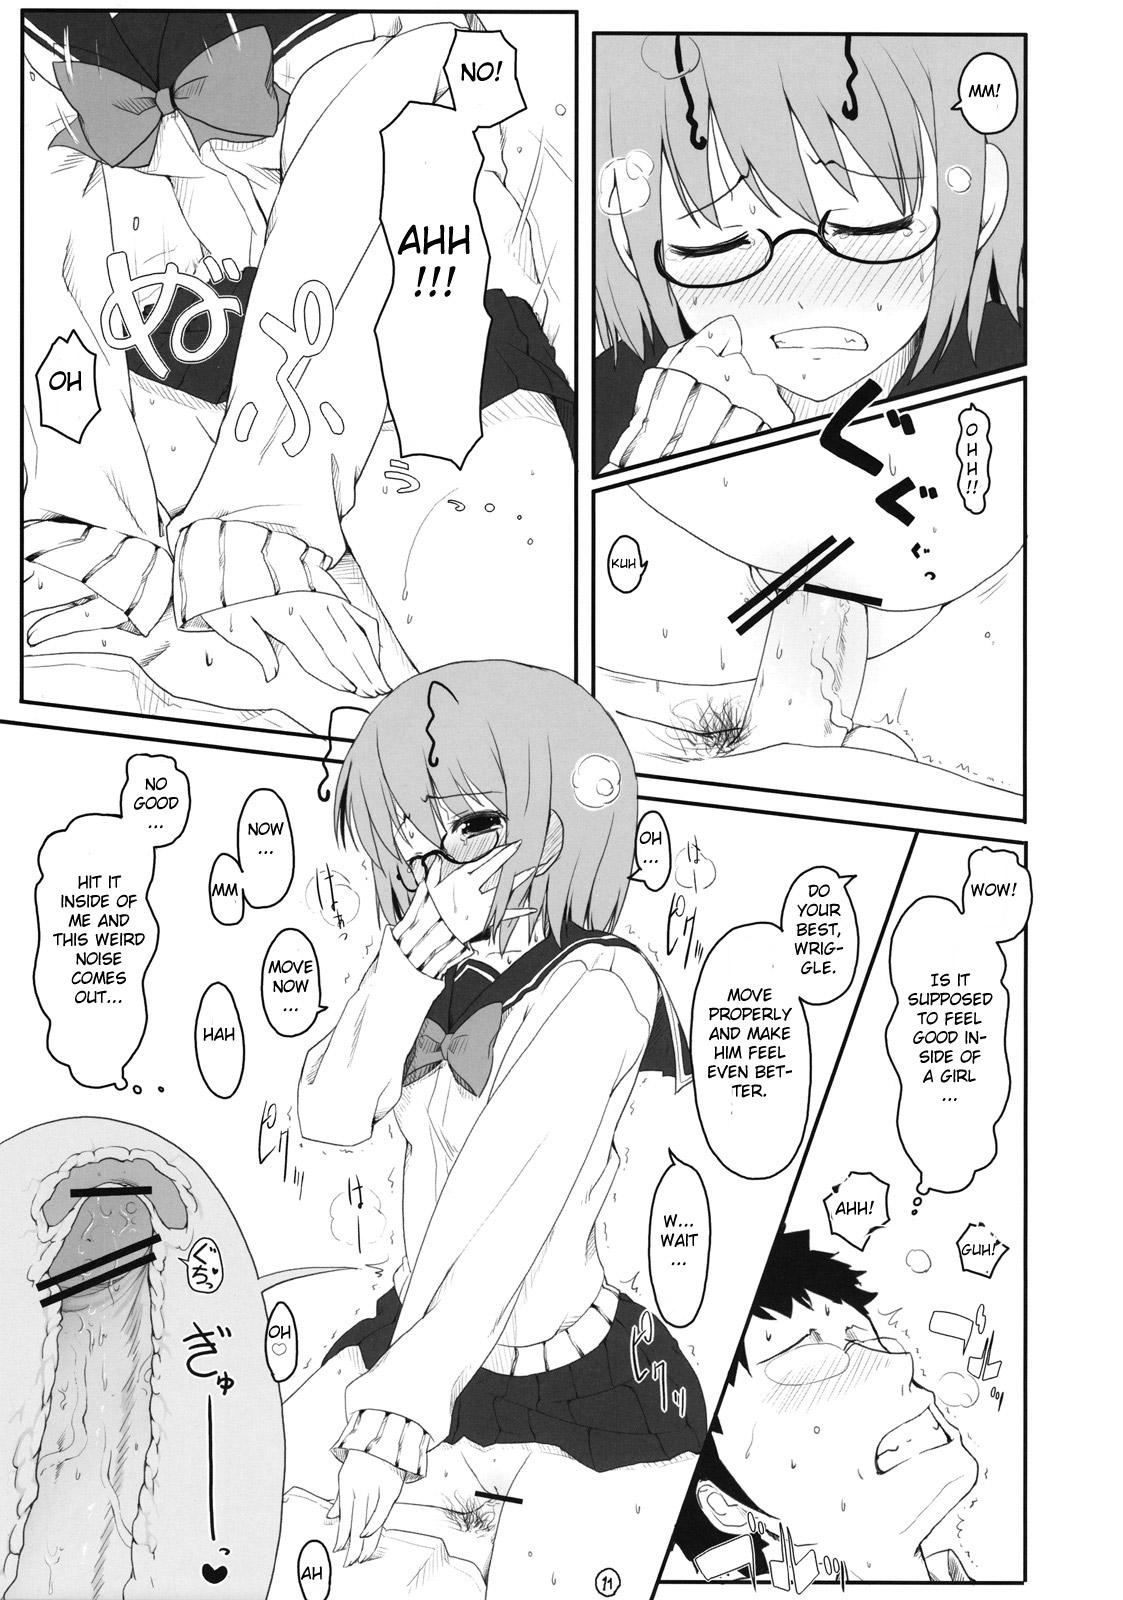 Passivo Touhou Megane - Touhou project Doggy Style Porn - Page 10